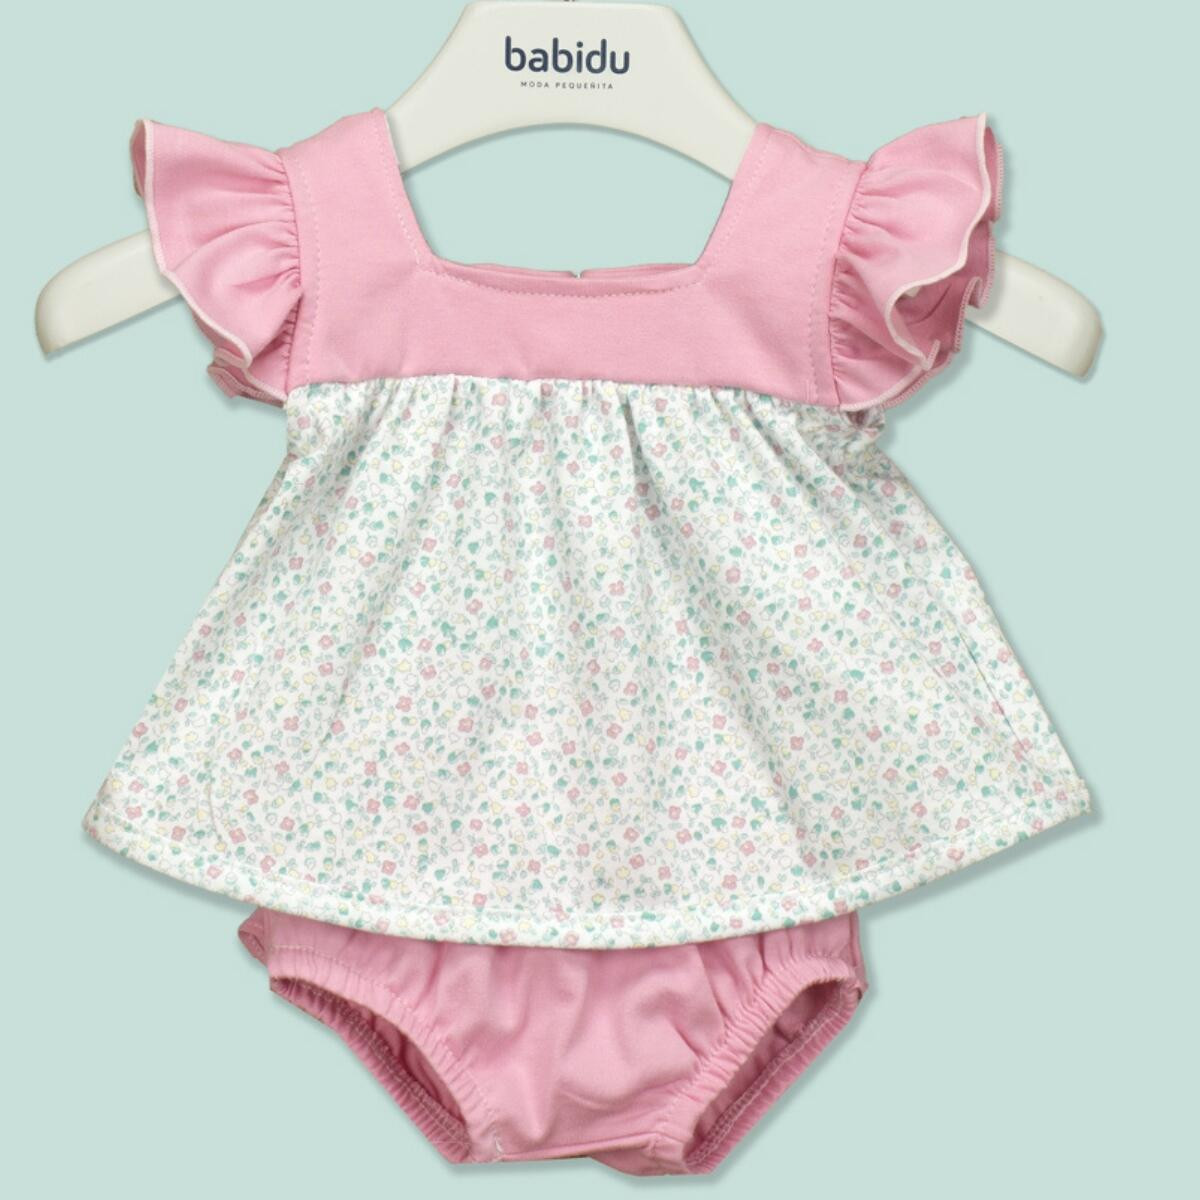 FLOWERY PRINTED BLOUSE AND NAPPY COVER BABIDU - 1